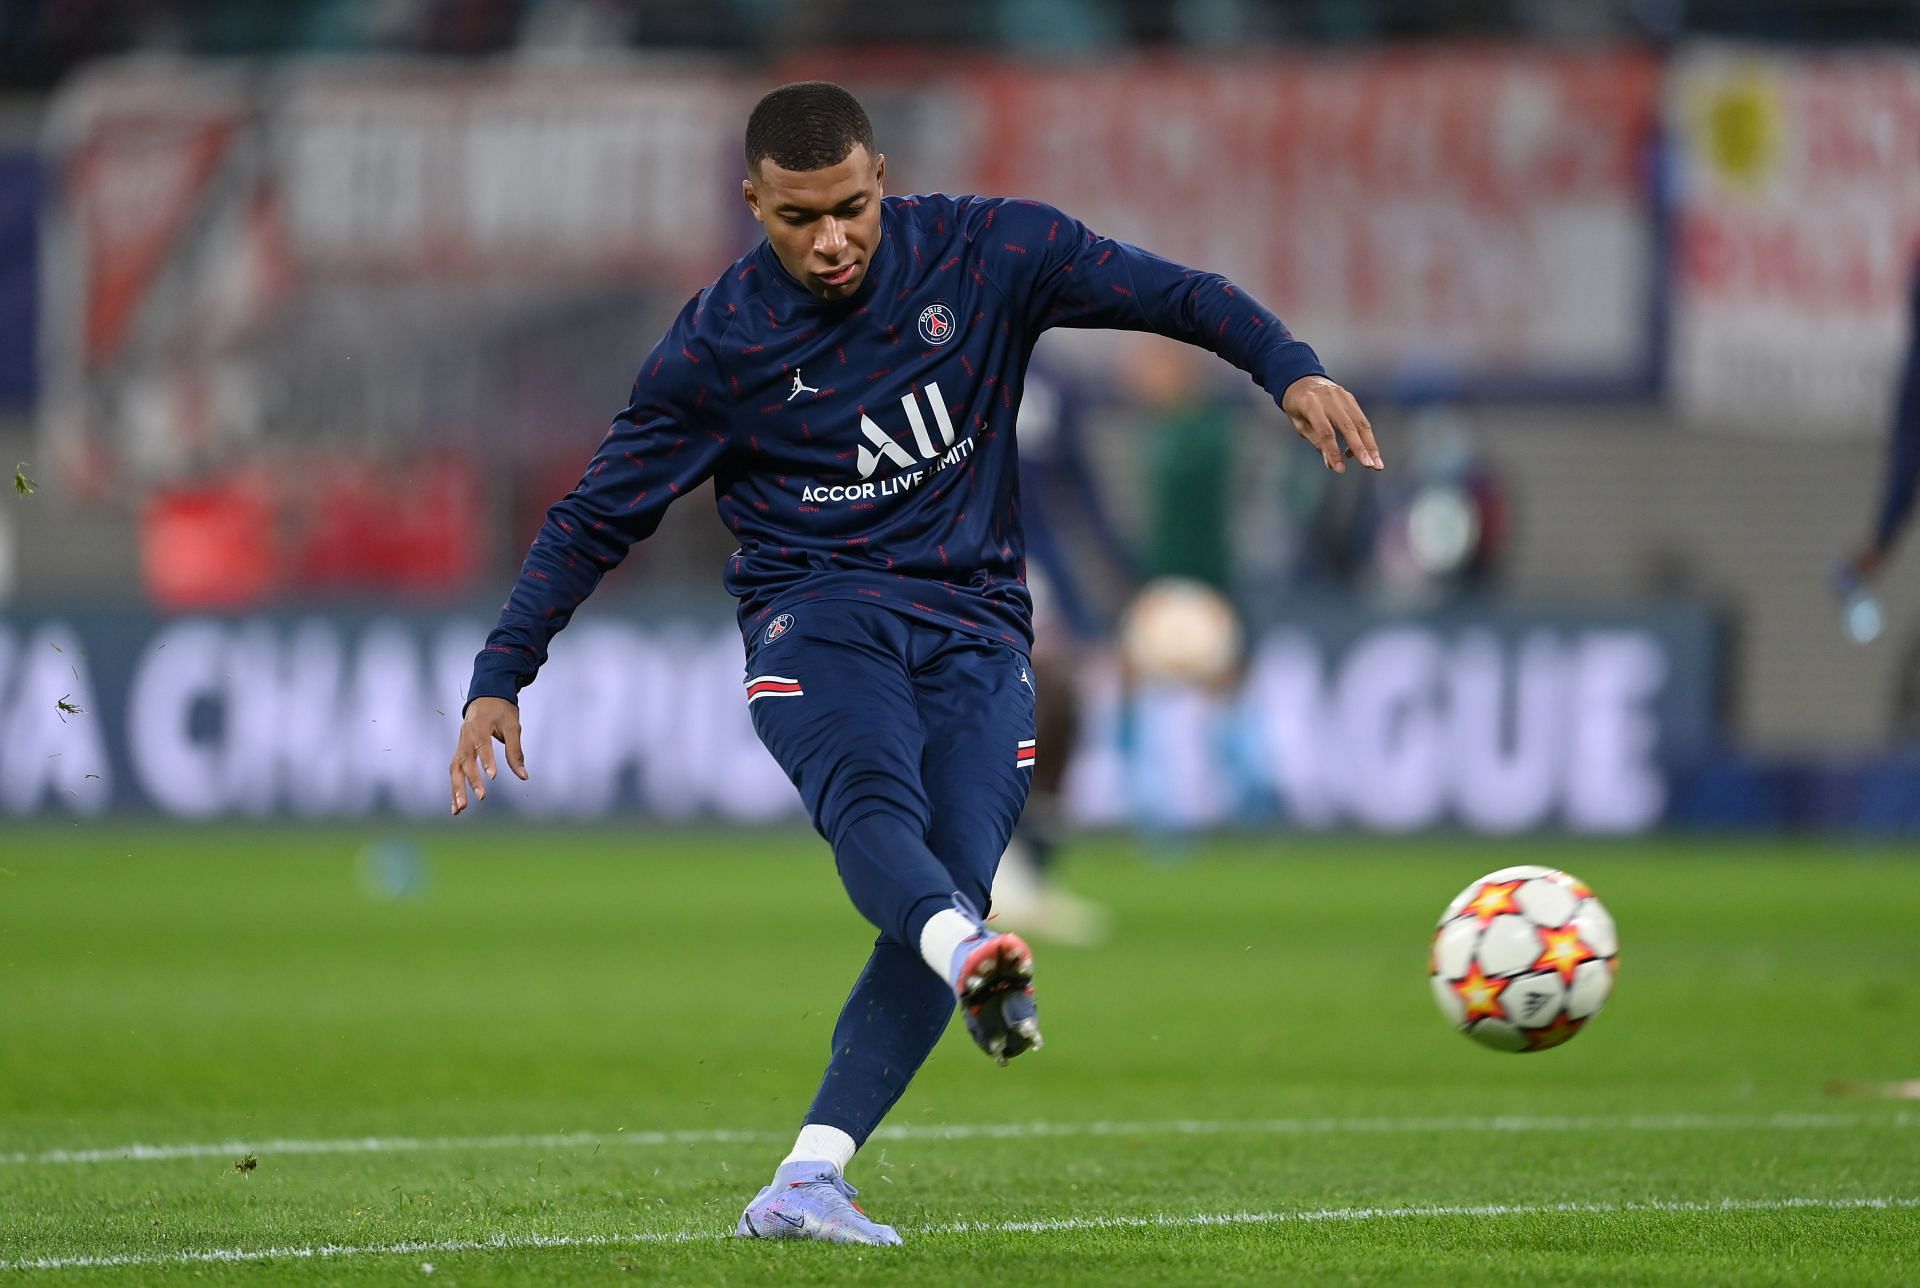 Real Madrid tried to sign Kylian Mbappe in the summer